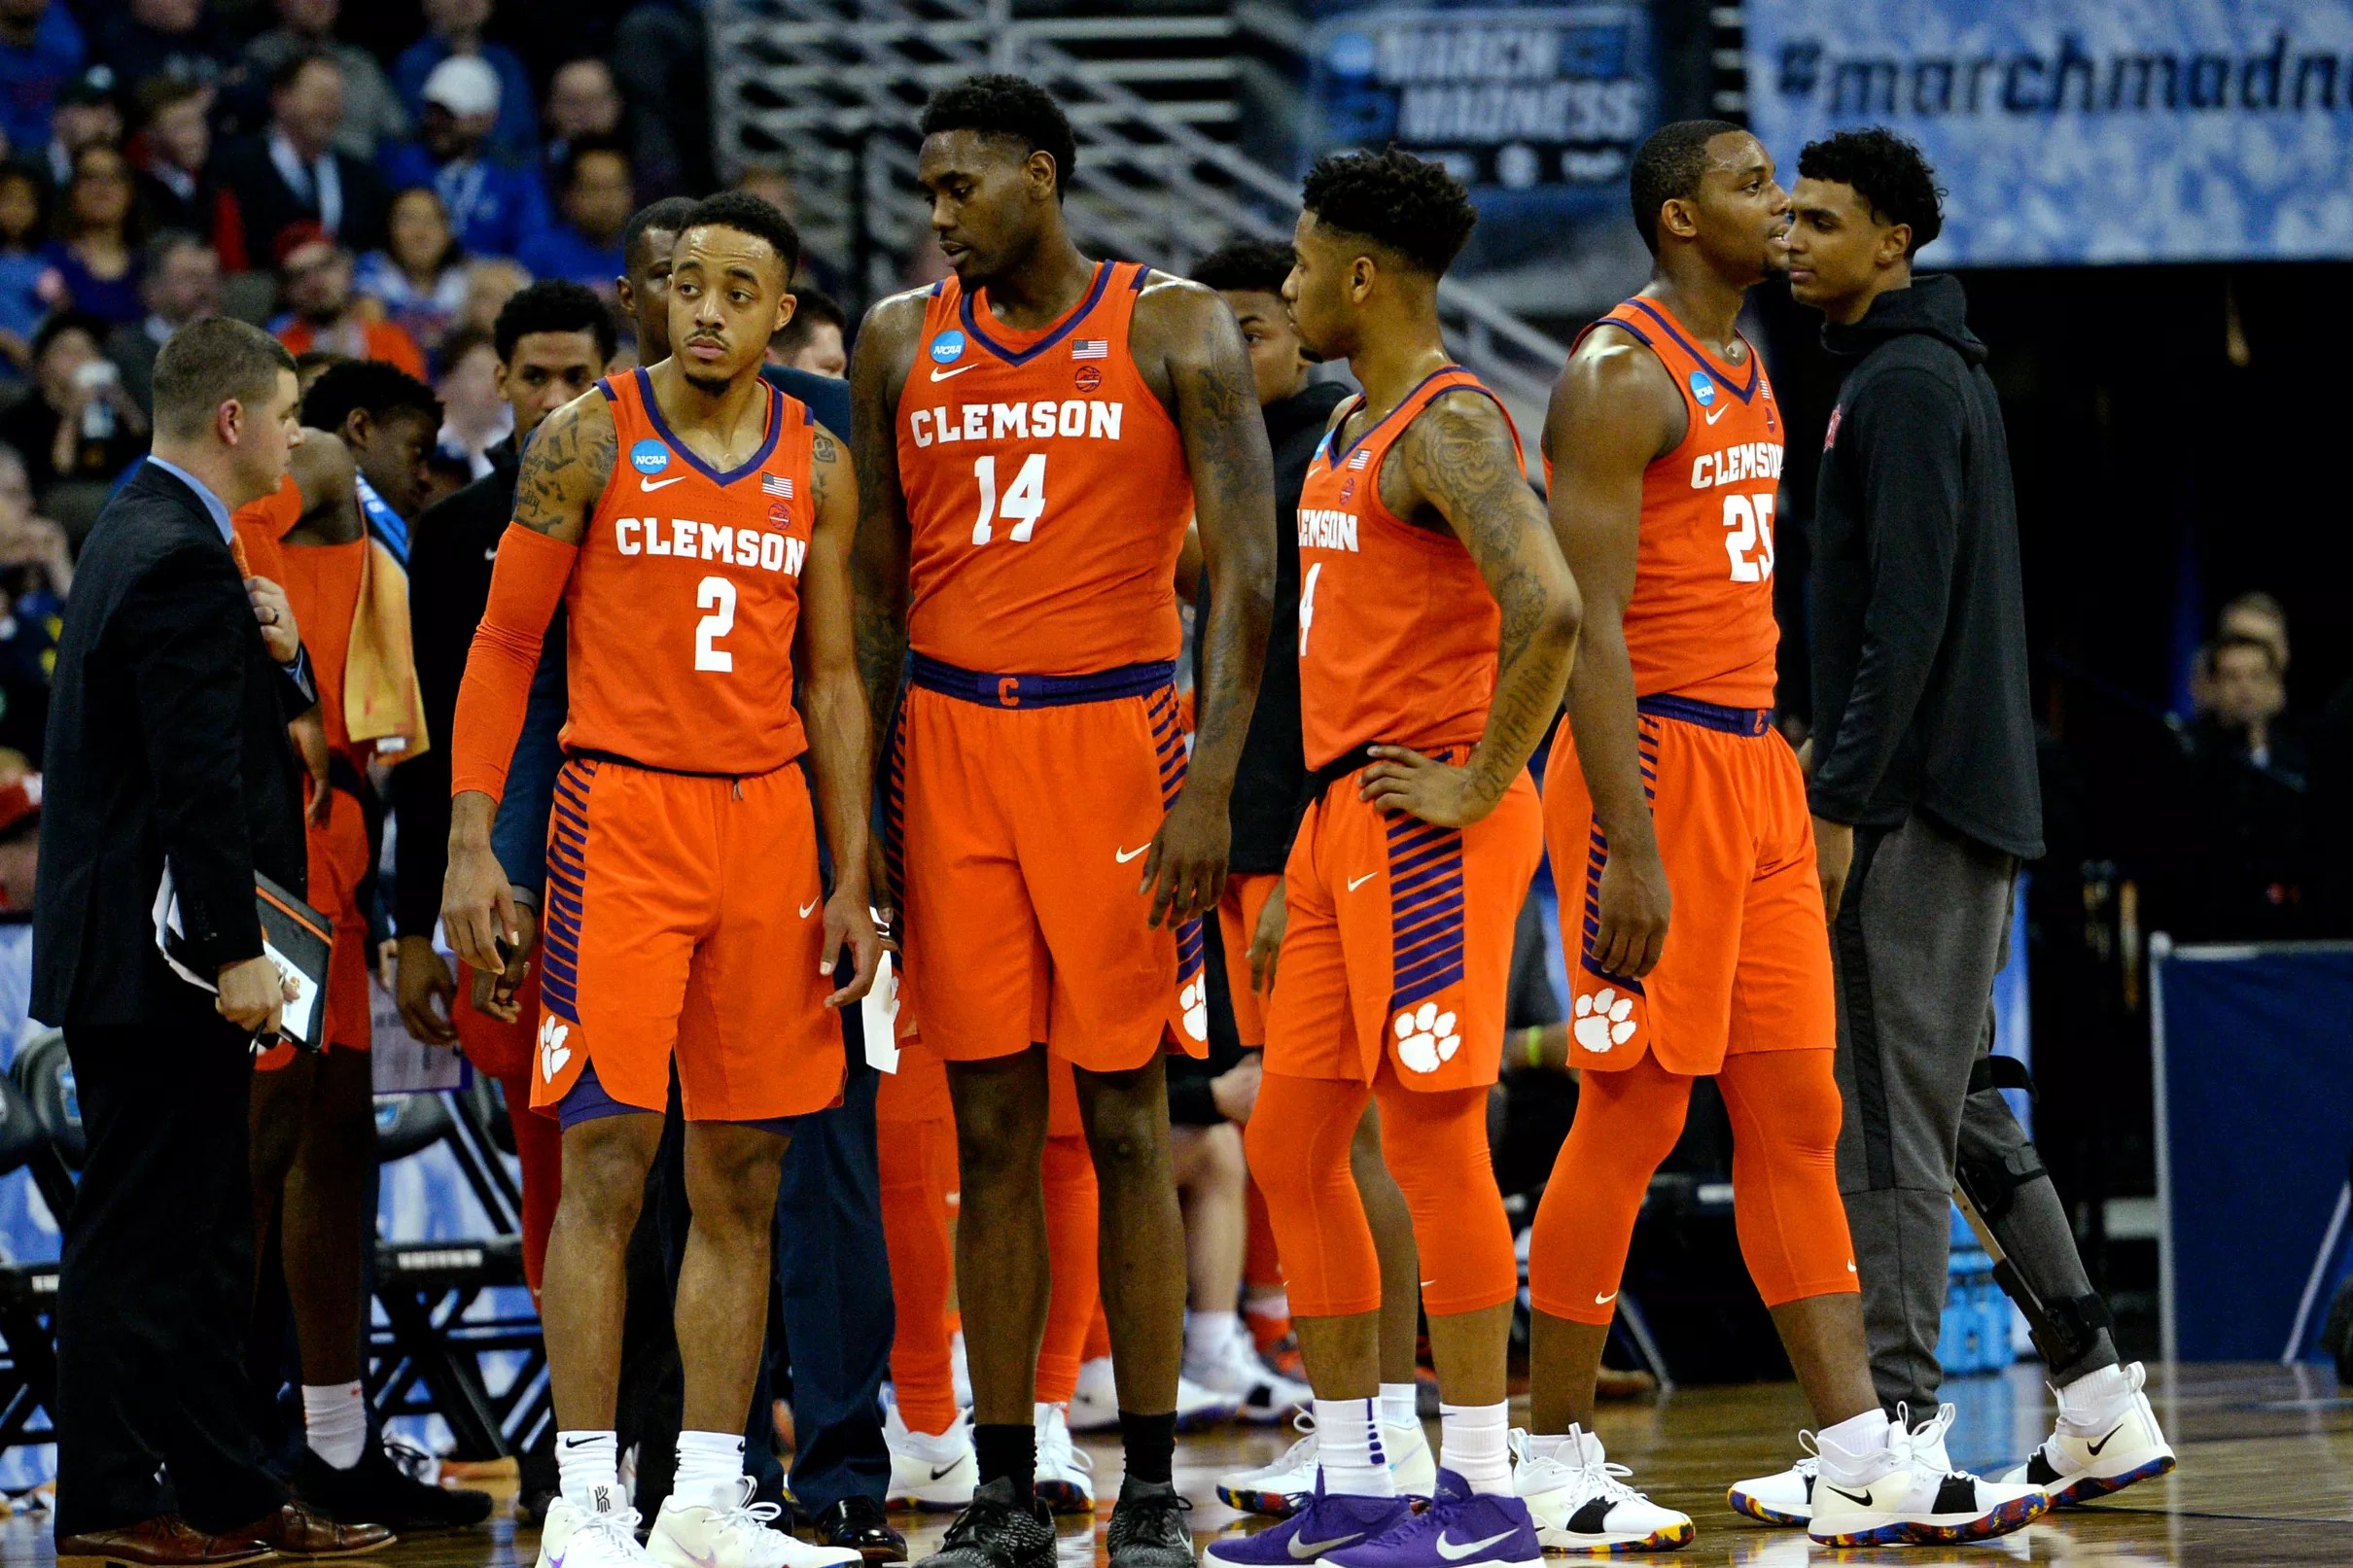 Clemson Basketball What will 201819 look like?